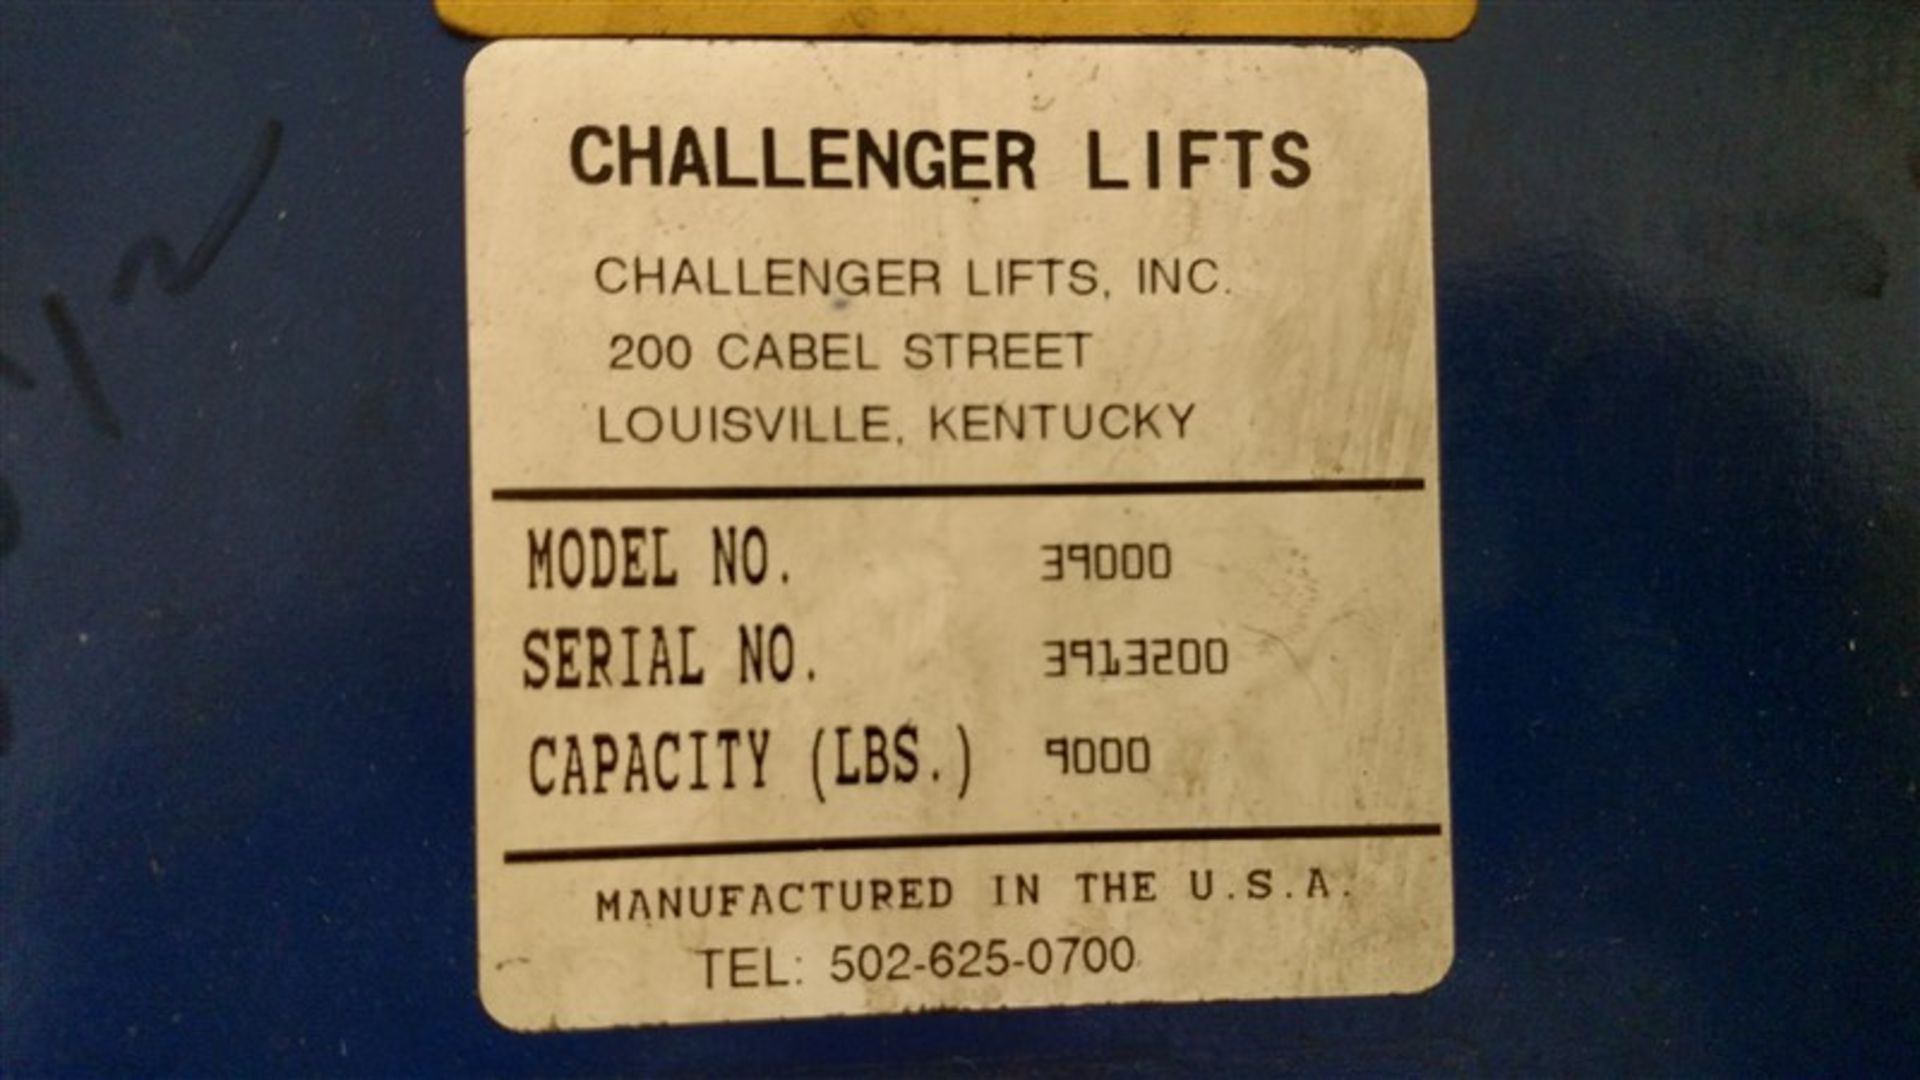 Challenger Model 39000 (9,000#) 2-Post Surface Lift s/n 3913200 (1 x Your Bid) - Image 2 of 6